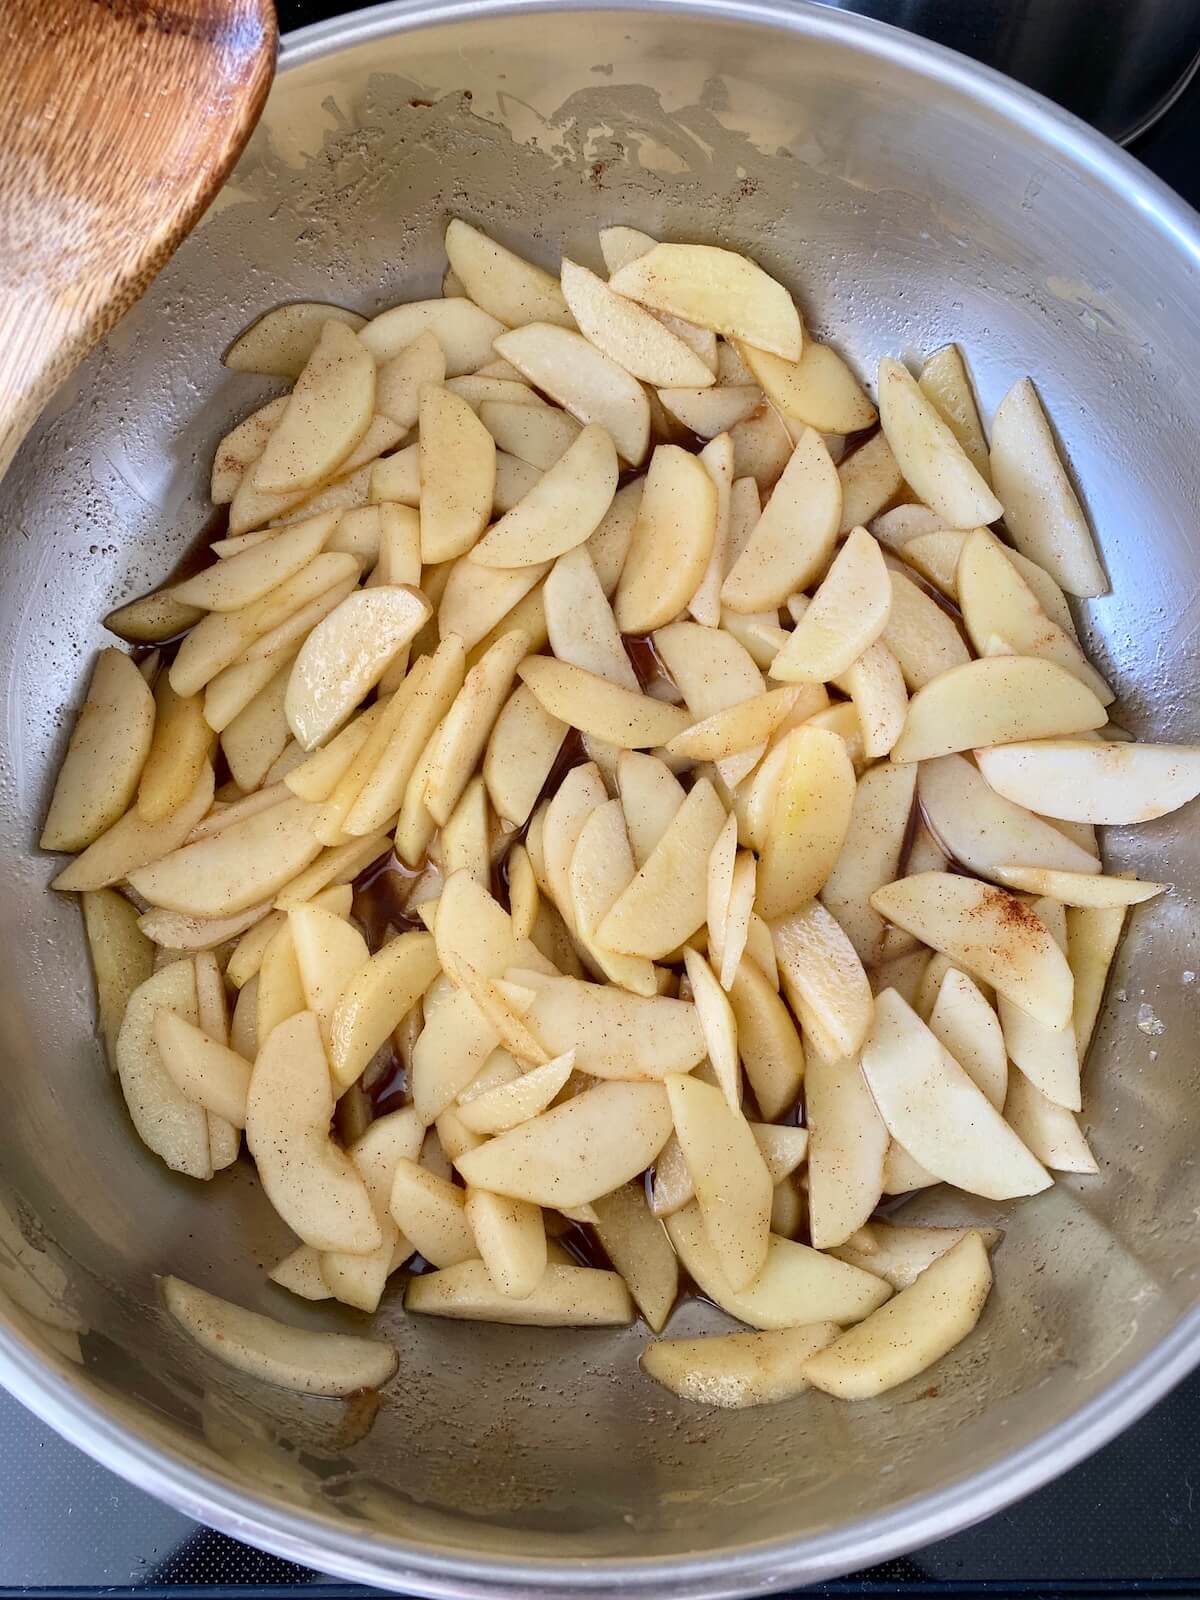 Thinly sliced apples being sautéed with cinnamon, sugar, nutmeg, and butter in a stainless steel skillet. There is a wooden spoon sitting on the left edge of the pan.